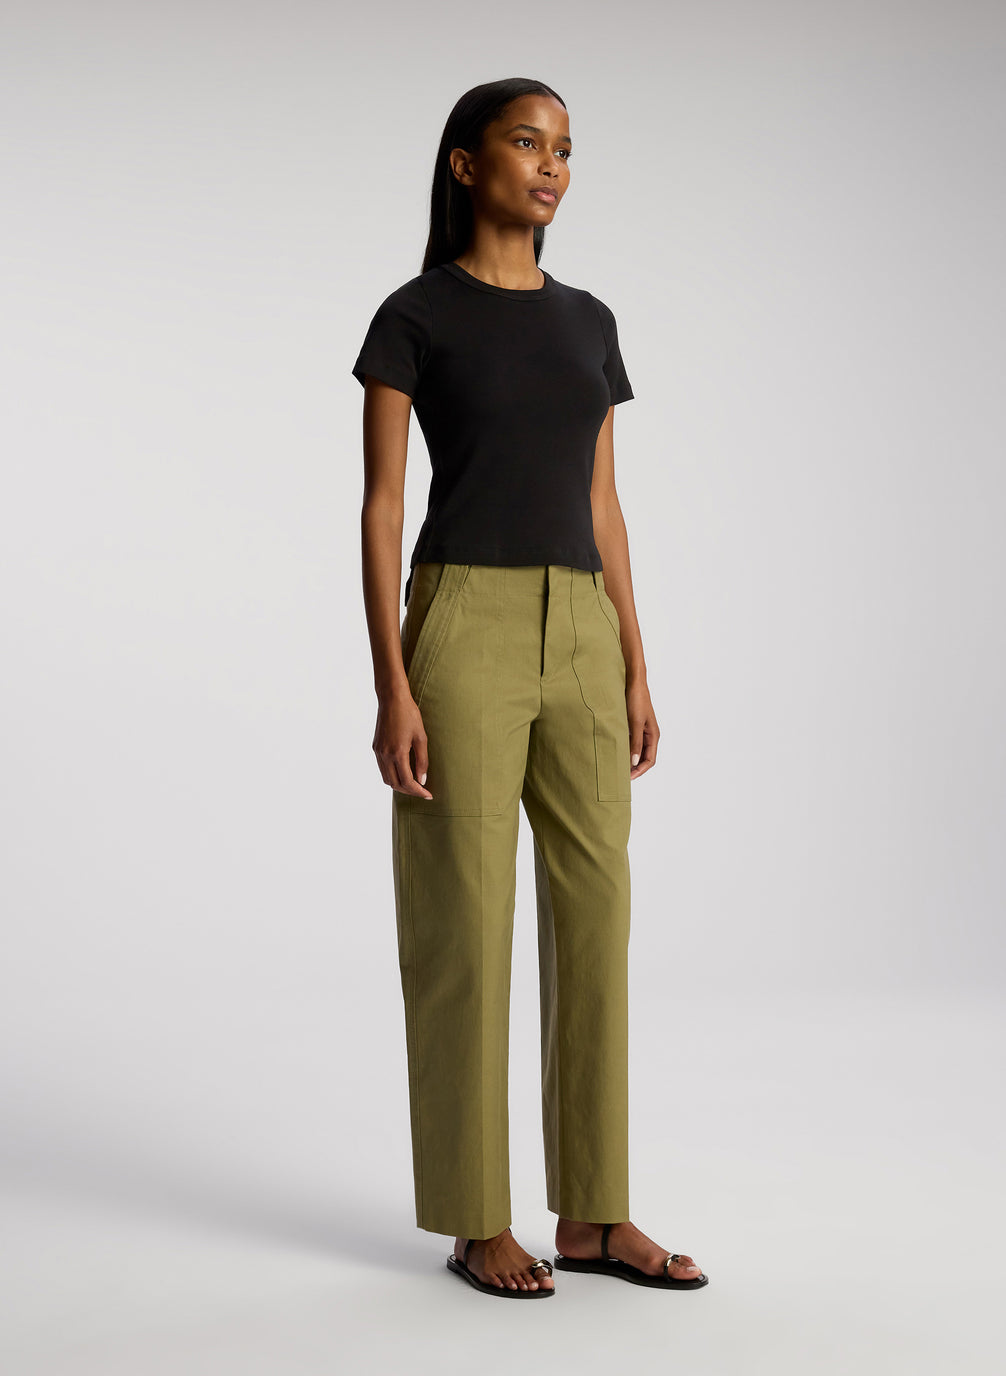 side view of woman wearing black tshirt and olive green pants